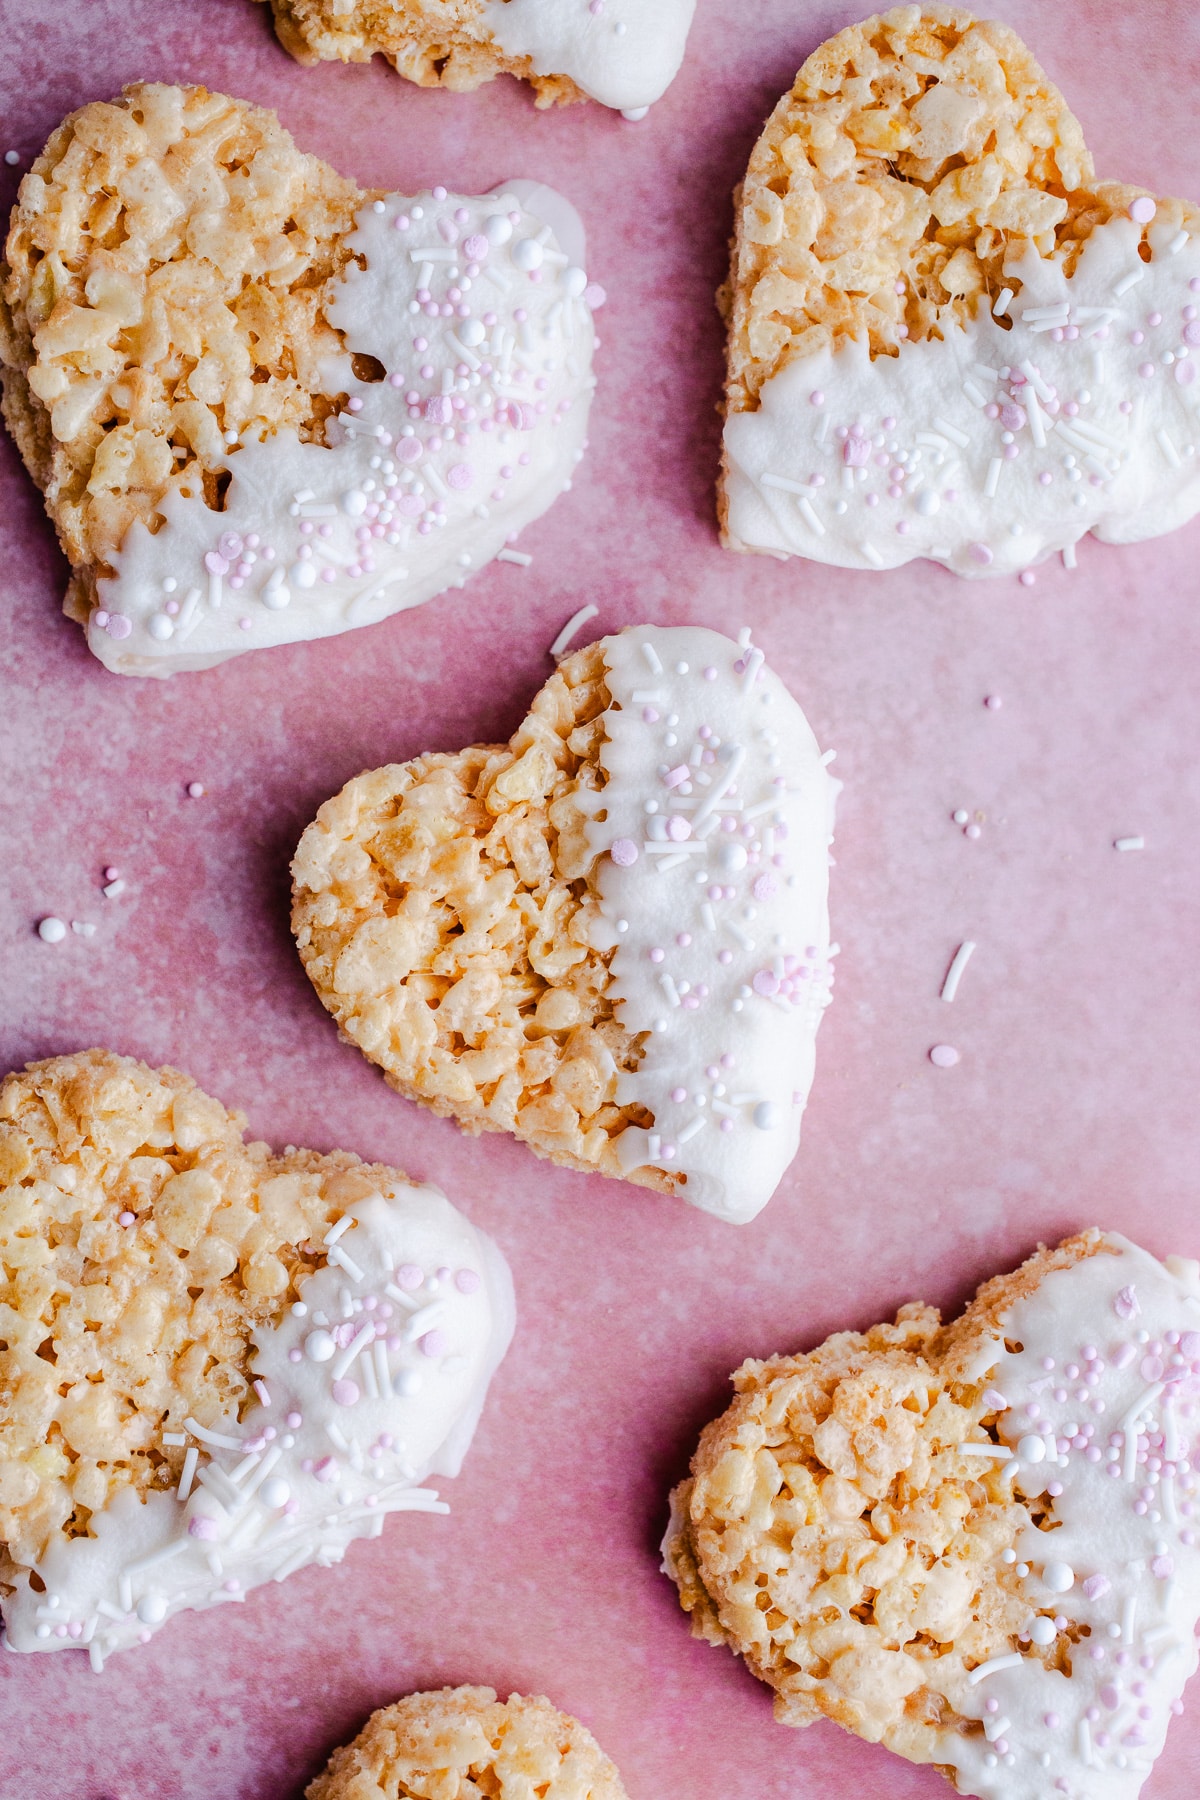 Heart shaped rice krispies treats dipped in white chocolate.